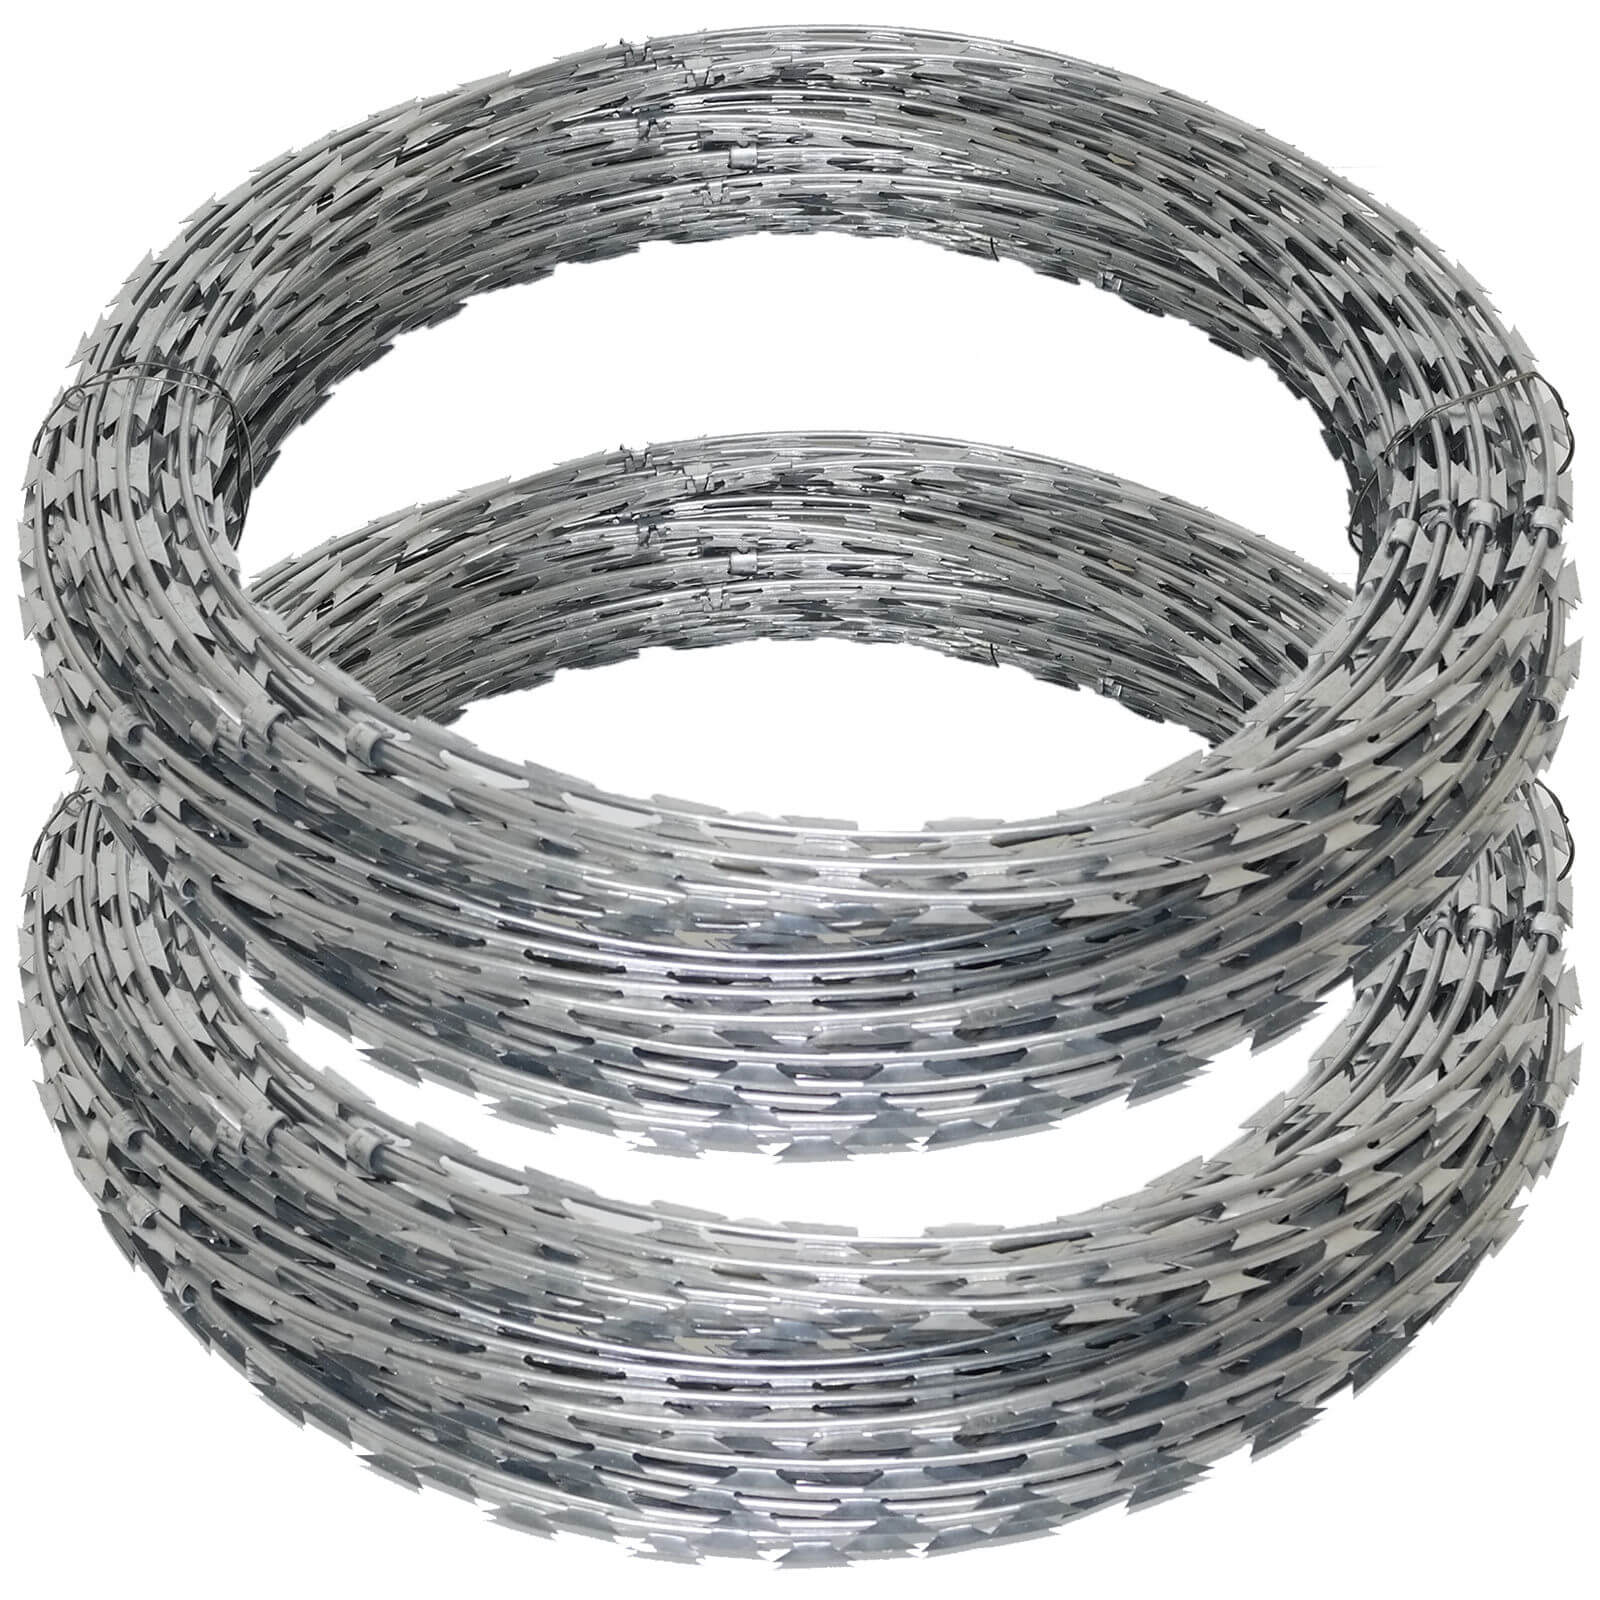 Discover the world of razor wire fencing: your safety is our priority